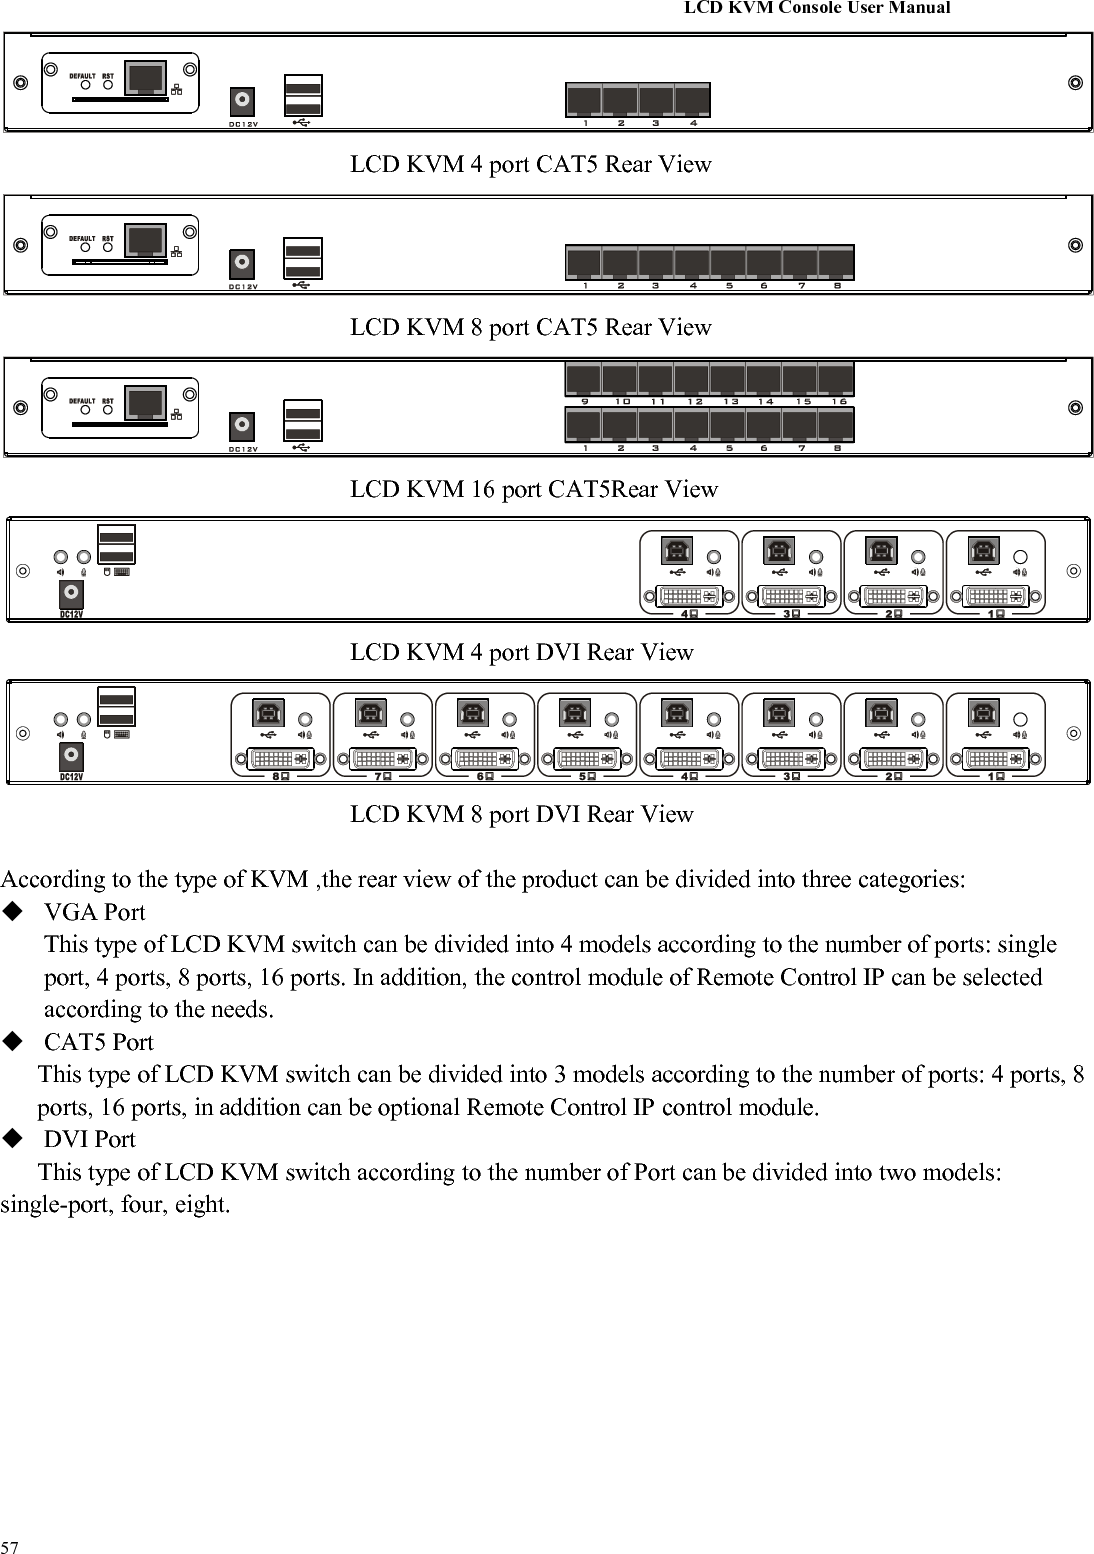 LCD KVM Console User Manual57LCD KVM 4 port CAT5 Rear ViewLCD KVM 8 port CAT5 Rear ViewLCD KVM 16 port CAT5Rear ViewLCD KVM 4 port DVI Rear ViewLCD KVM 8 port DVI Rear ViewAccording to the type of KVM ,the rear view of the product can be divided into three categories:VGA PortThis type of LCD KVM switch can be divided into 4 models according to the number of ports: singleport, 4 ports, 8 ports, 16 ports. In addition, the control module of Remote Control IP can be selectedaccording to the needs.CAT5 PortThis type of LCD KVM switch can be divided into 3 models according to the number of ports: 4 ports, 8ports, 16 ports, in addition can be optional Remote Control IP control module.DVI PortThis type of LCD KVM switch according to the number of Port can be divided into two models:single-port, four, eight.